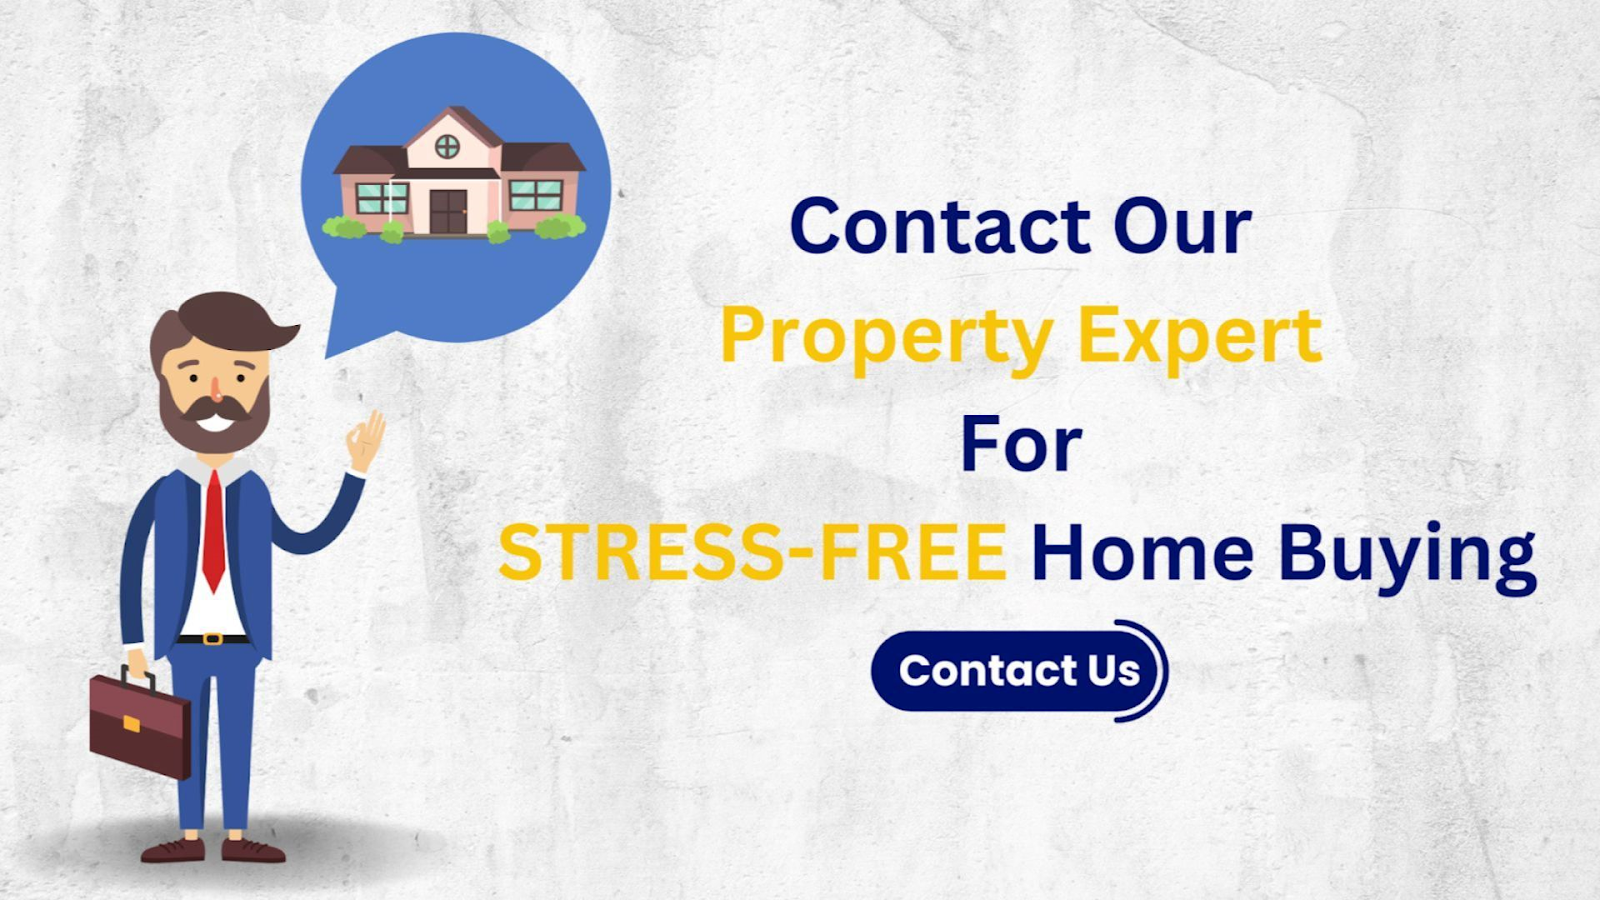 Contact a real agent to get advice at the time of property buying with a supportive nature at PropertyCloud